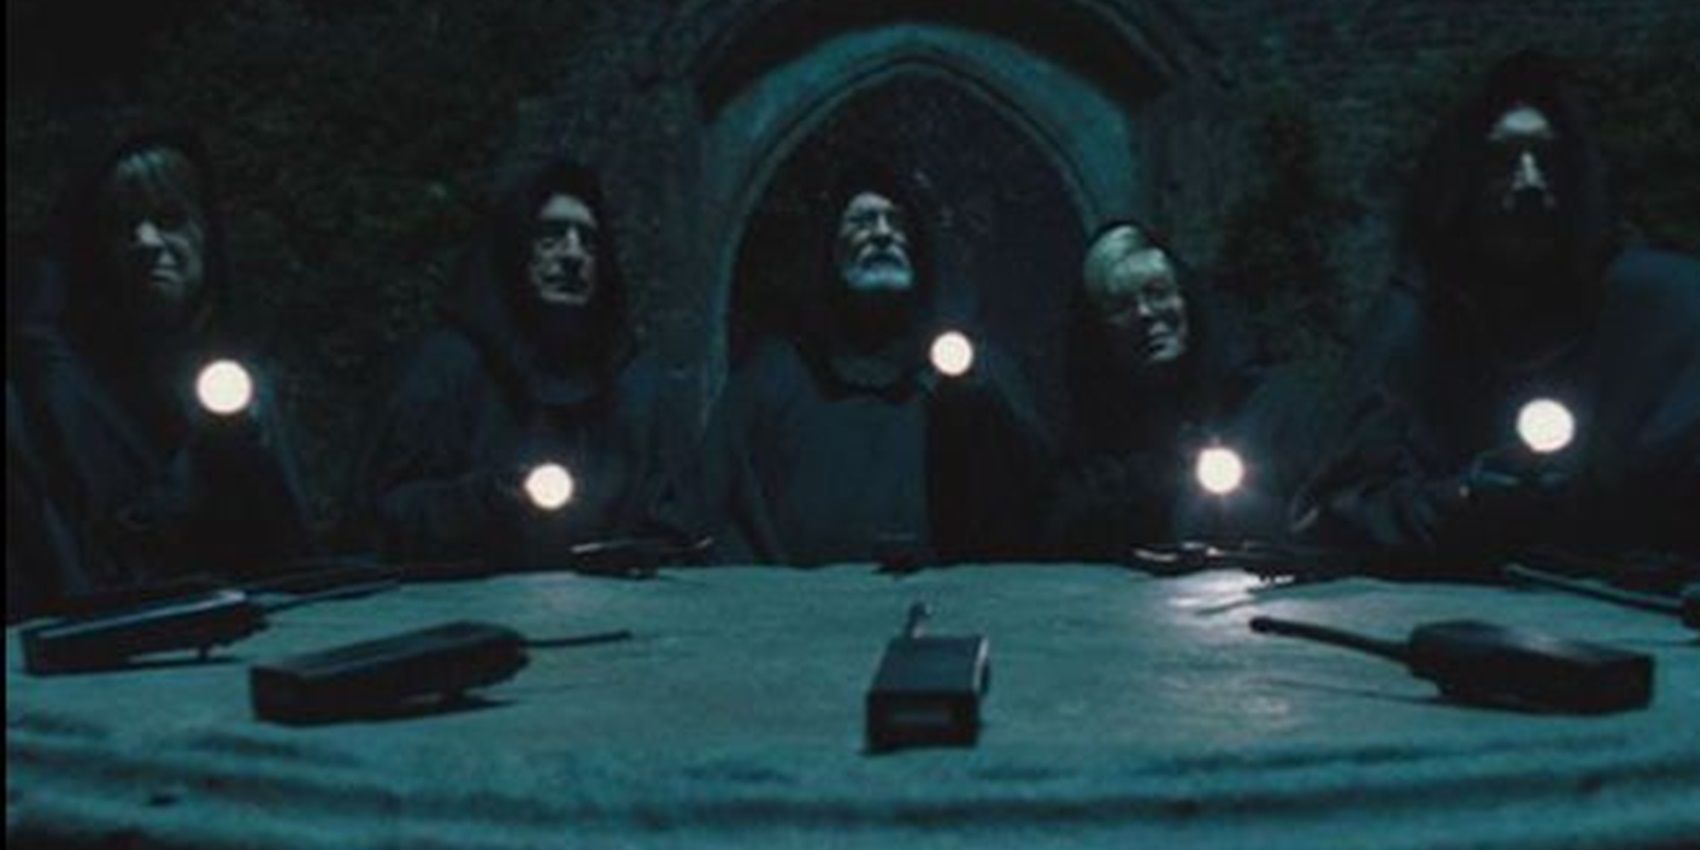 The neighbourhood watch in cloaks sitting around a table in Hot Fuzz